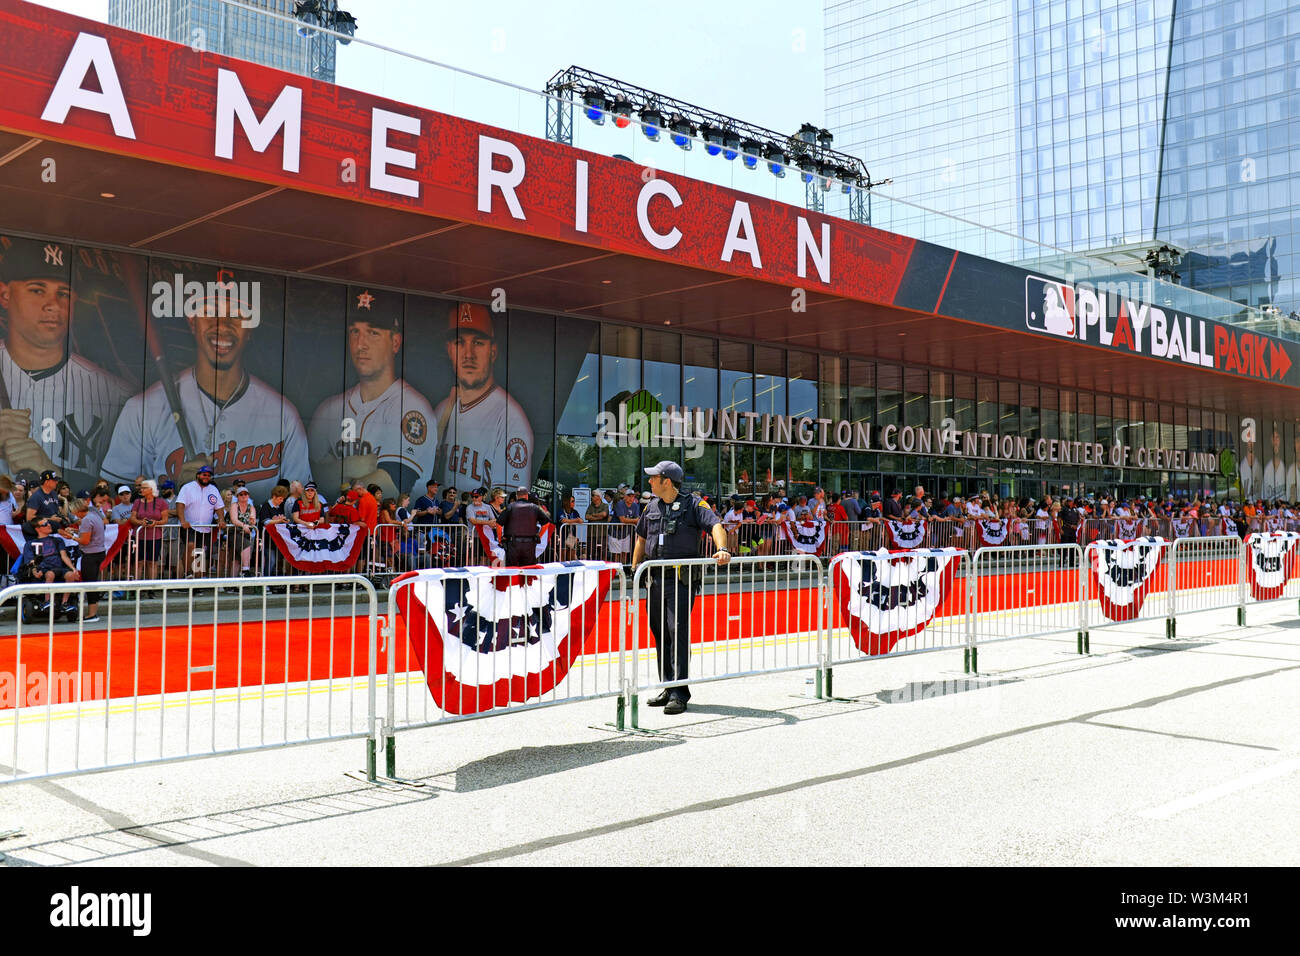 Crowds in front of the Cleveland Convention Center wait for the 2019 MLB All Star Game to commence on Lakeside Avenue in Cleveland, Ohio, USA. Stock Photo